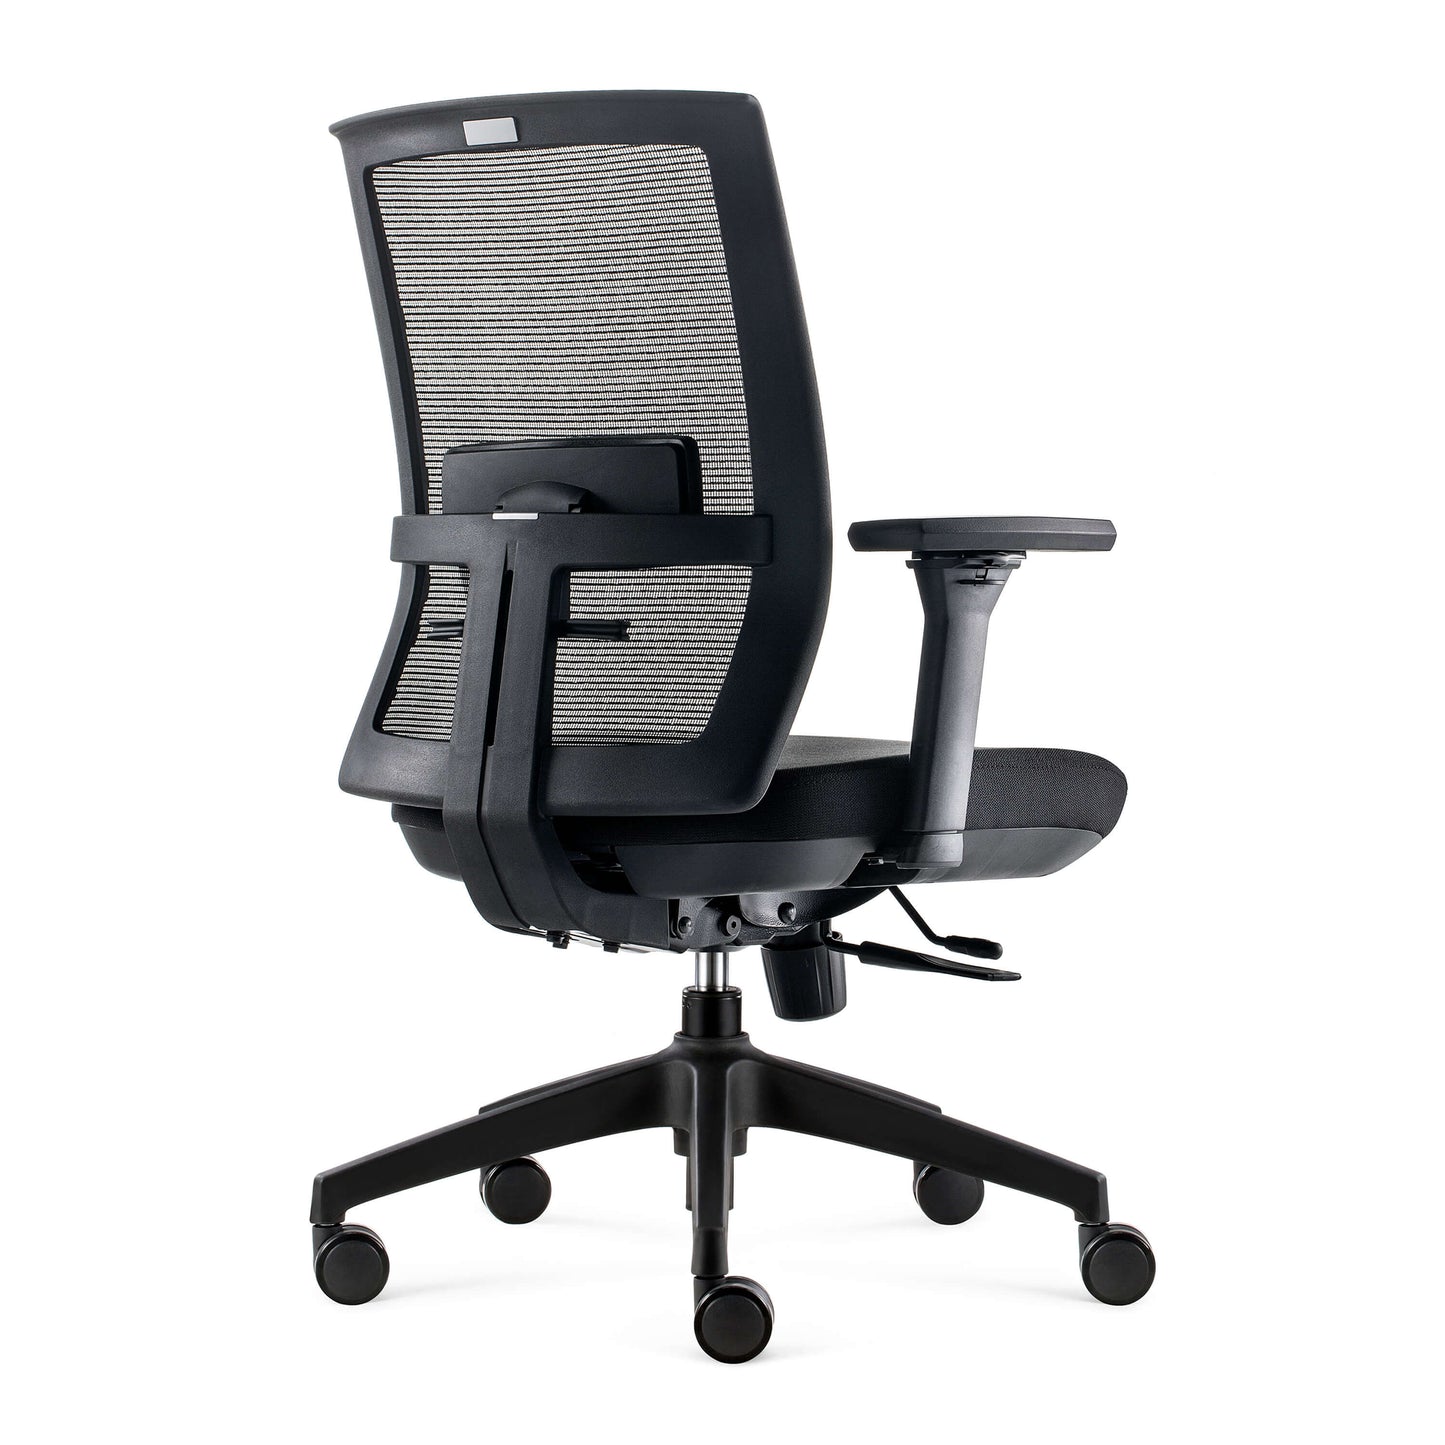 Office Task Chair with Mesh Back Adjustable Ergonomic Desk Chair 235